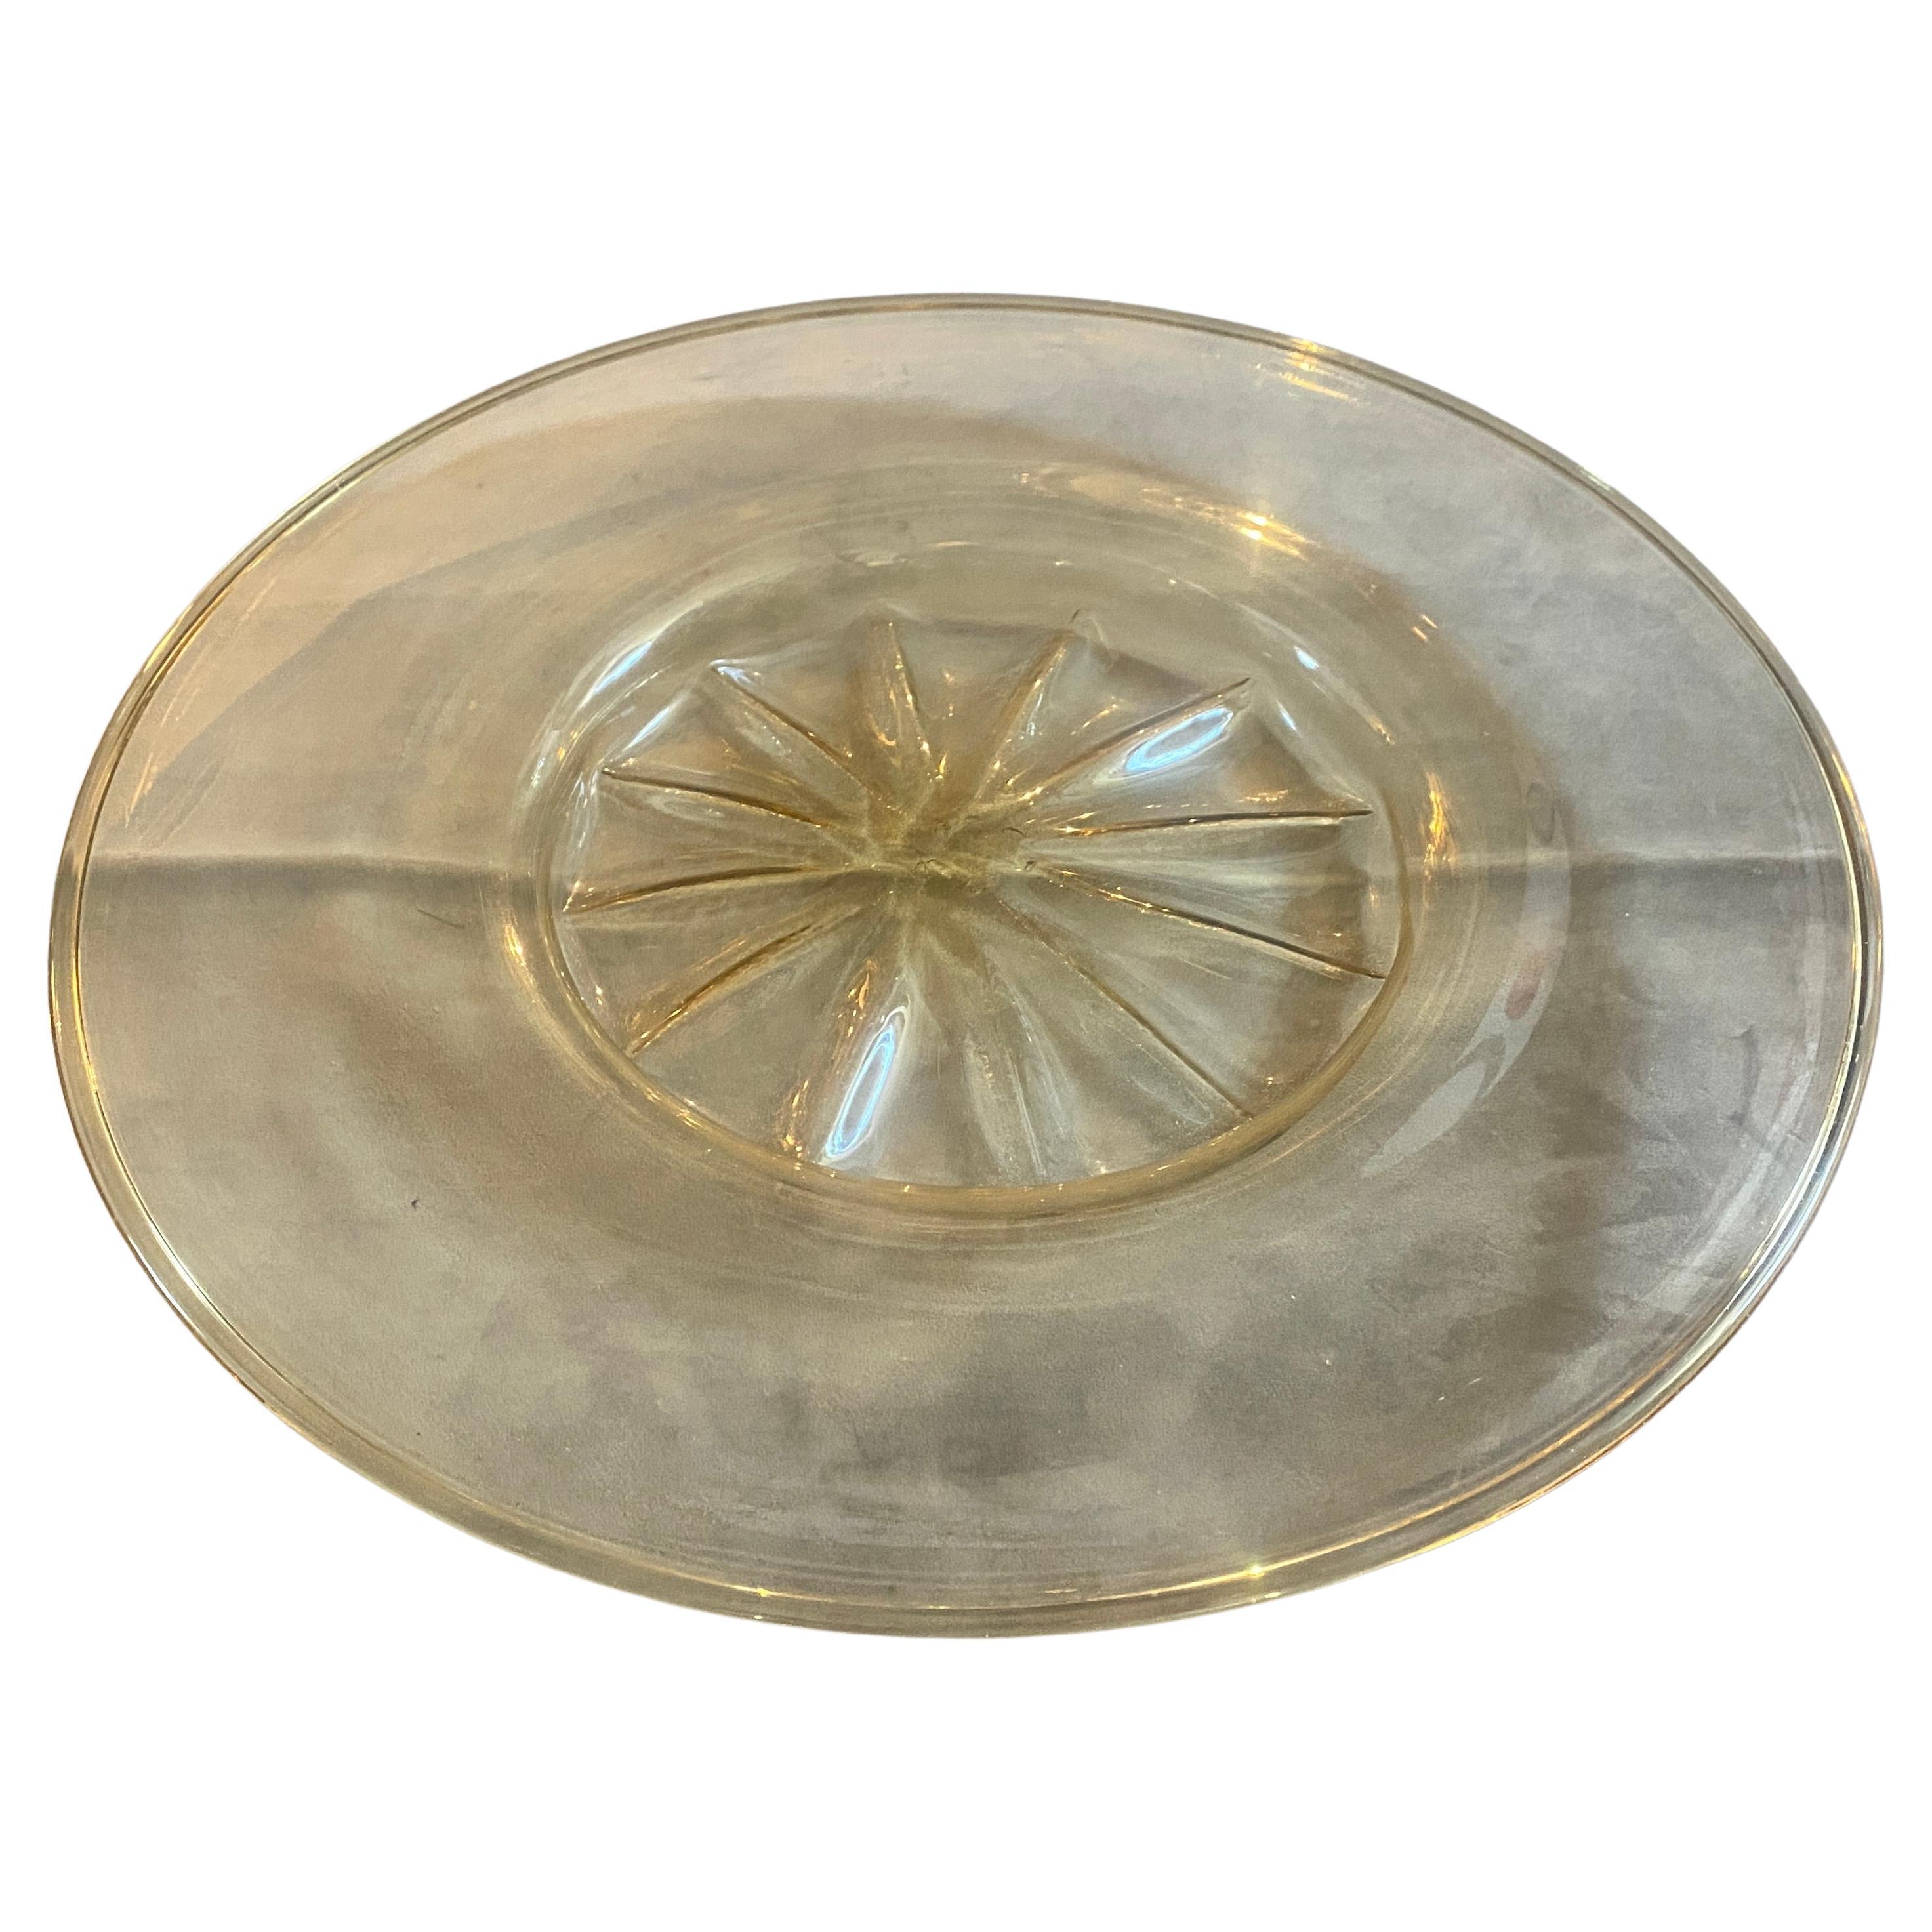 A large gold and transparent blown murano glass large plate designed in Venice by Vittorio Zecchin for Venini in the Thirties. It's in perfect condition. This plate, crafted by the esteemed glass artist Vittorio Zecchin for Venini in the 1930s,